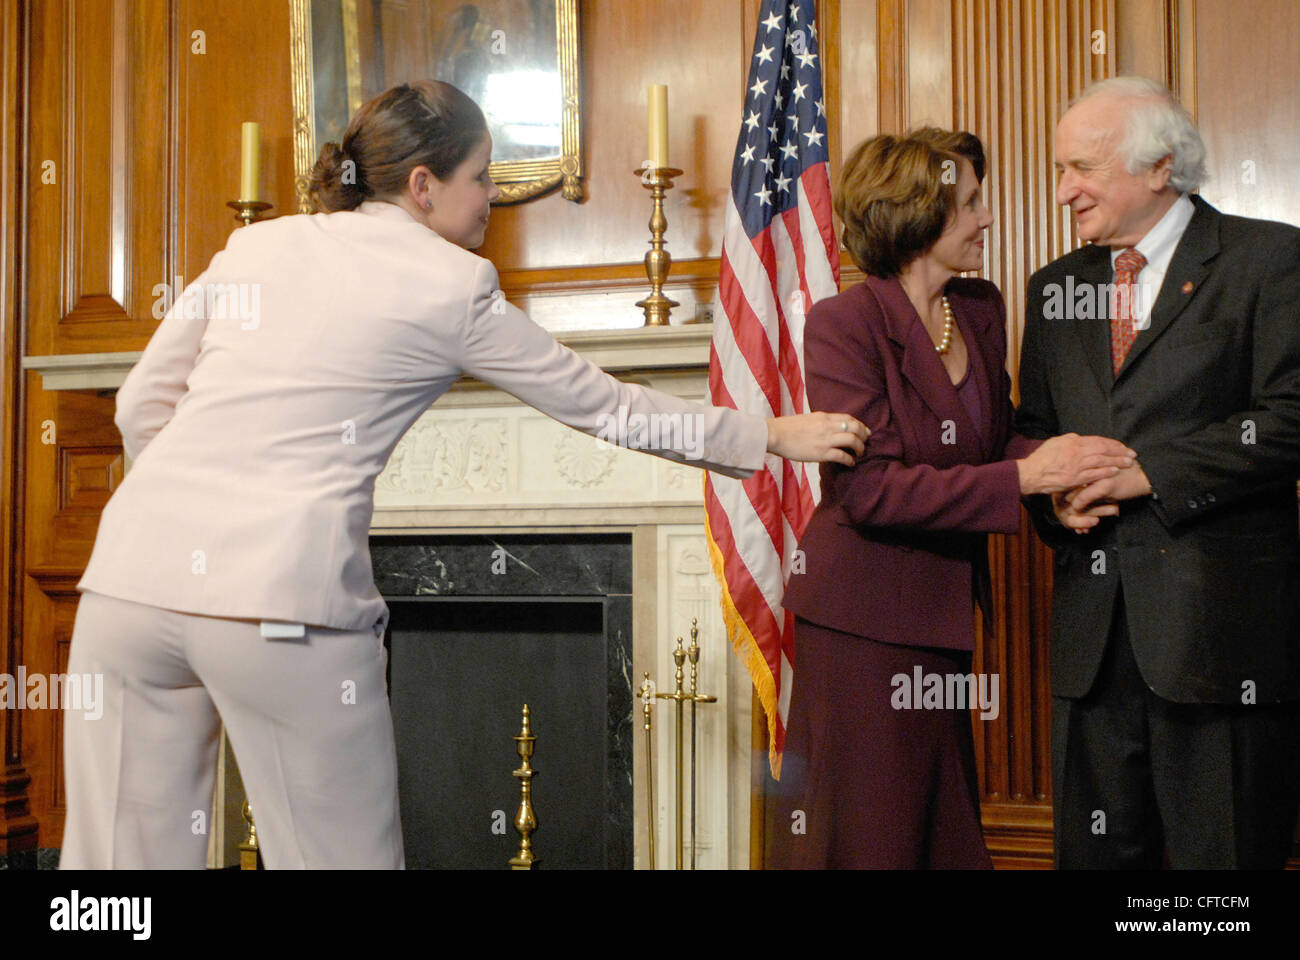 Jan 04, 2007 - Washington, DC, USA - Speaker of the House NANCY PELOSI swears in Rep. SANDERS LEVIN (D-MI) for the 110th Congress. Sanders was joined by his brother Carl, who serves as a Senator from Michigan. Stock Photo